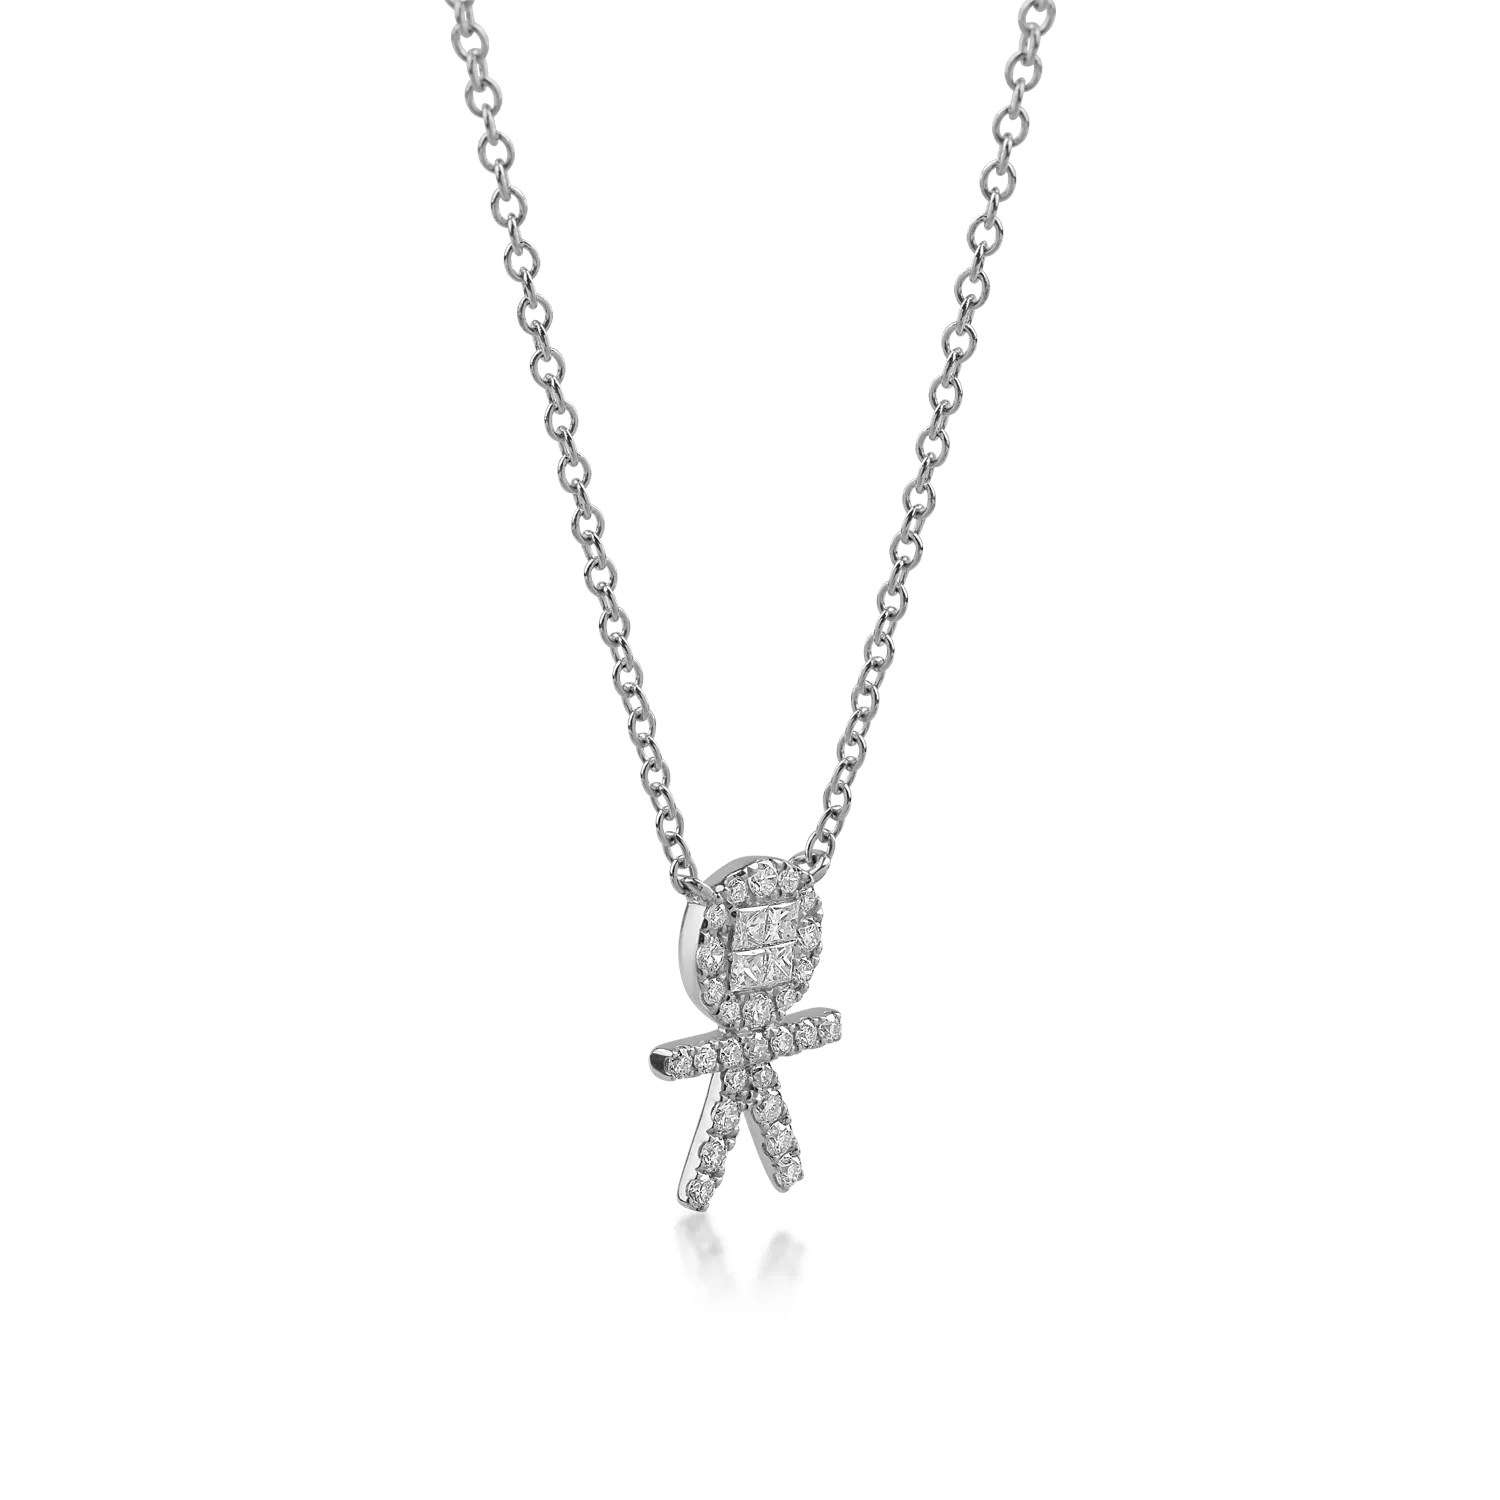 White gold chain with pendant with 0.32ct diamonds